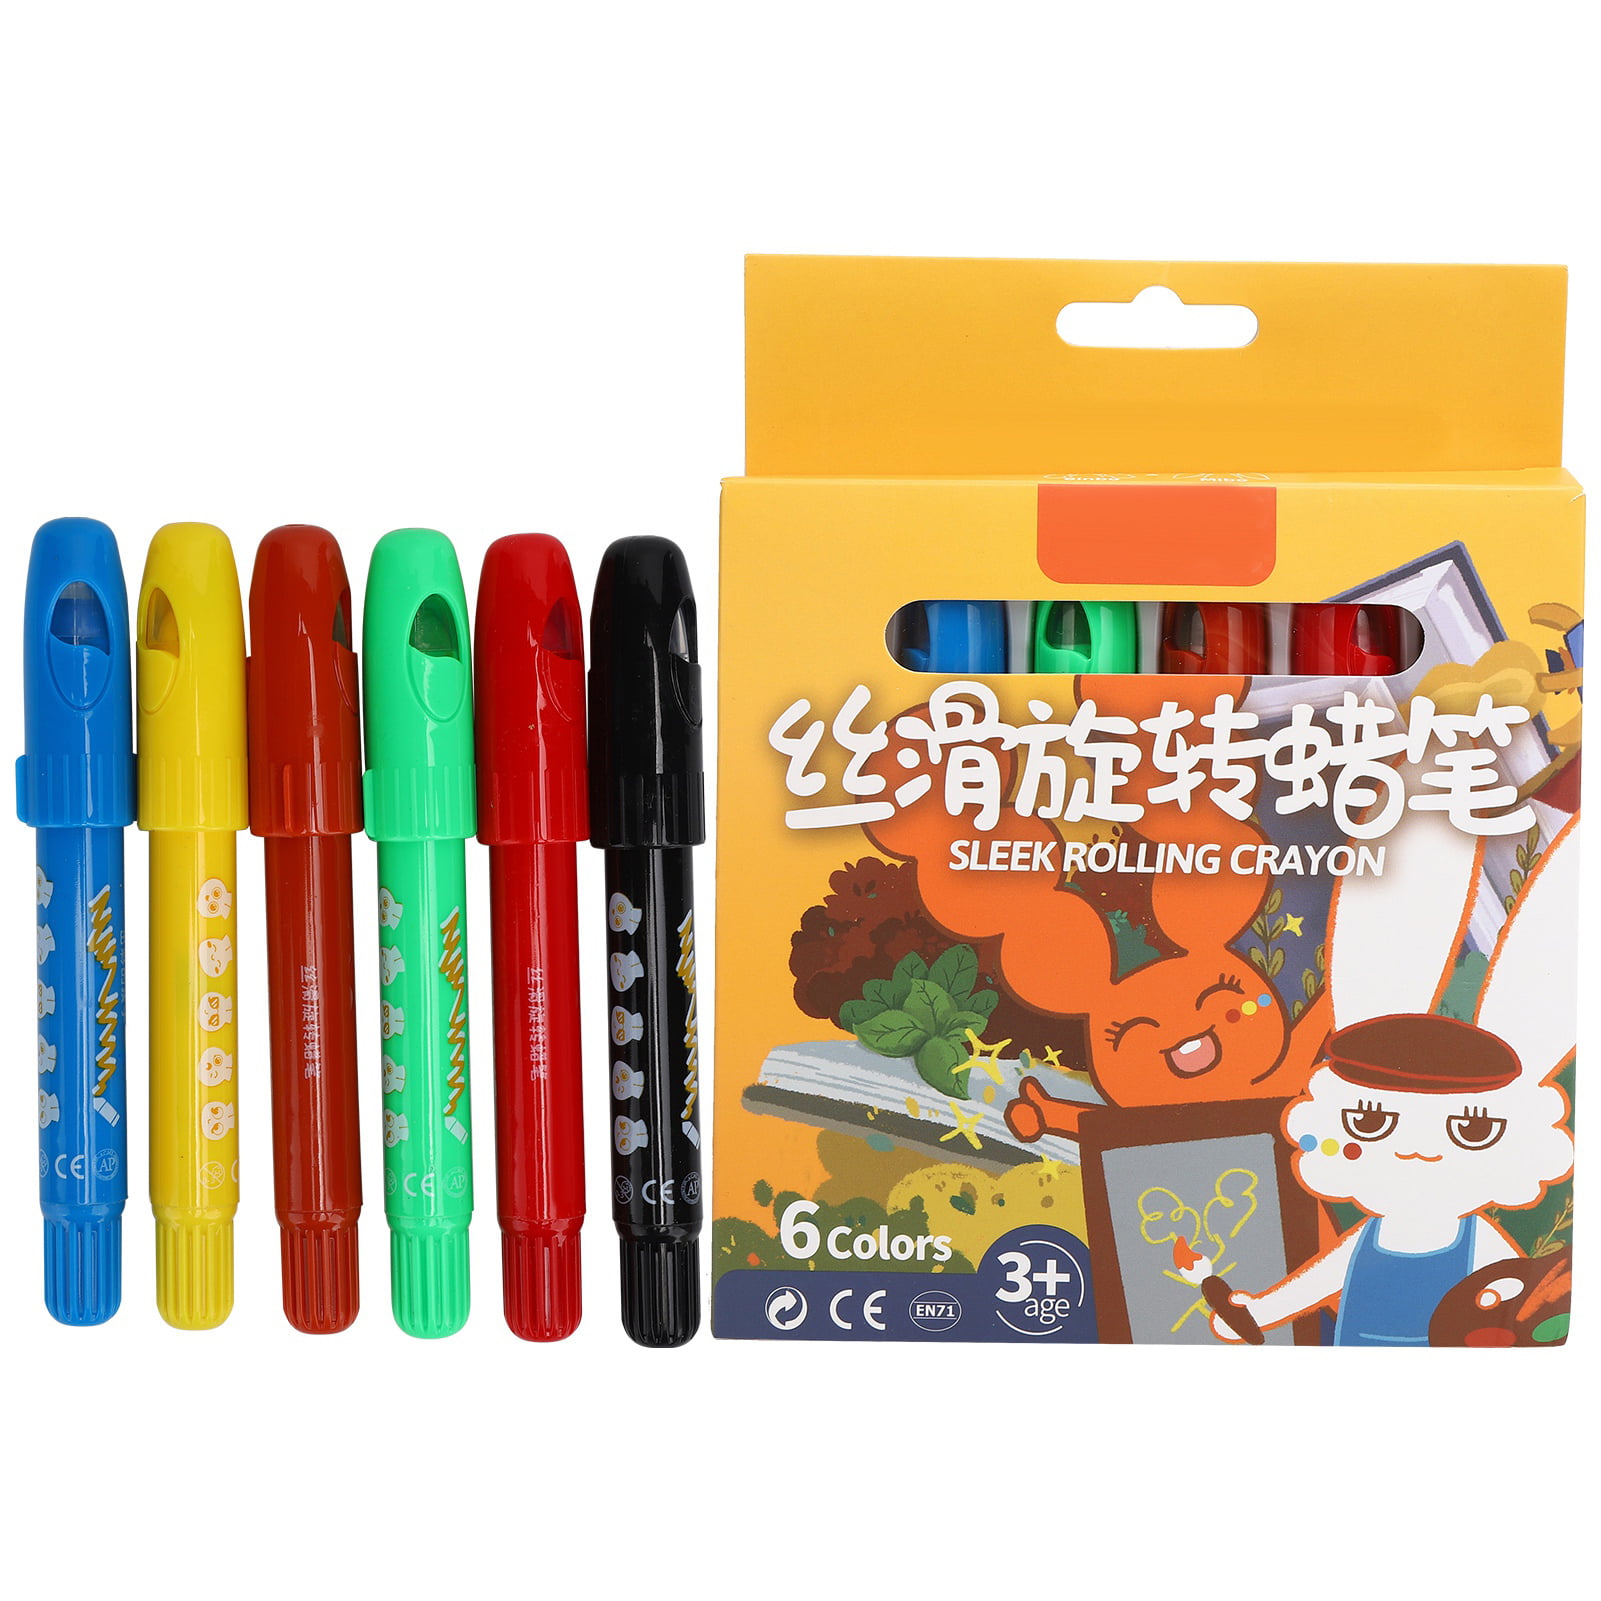 Jar Melo 24 Colors Jumbo Crayons for Toddlers, Twistable Crayons